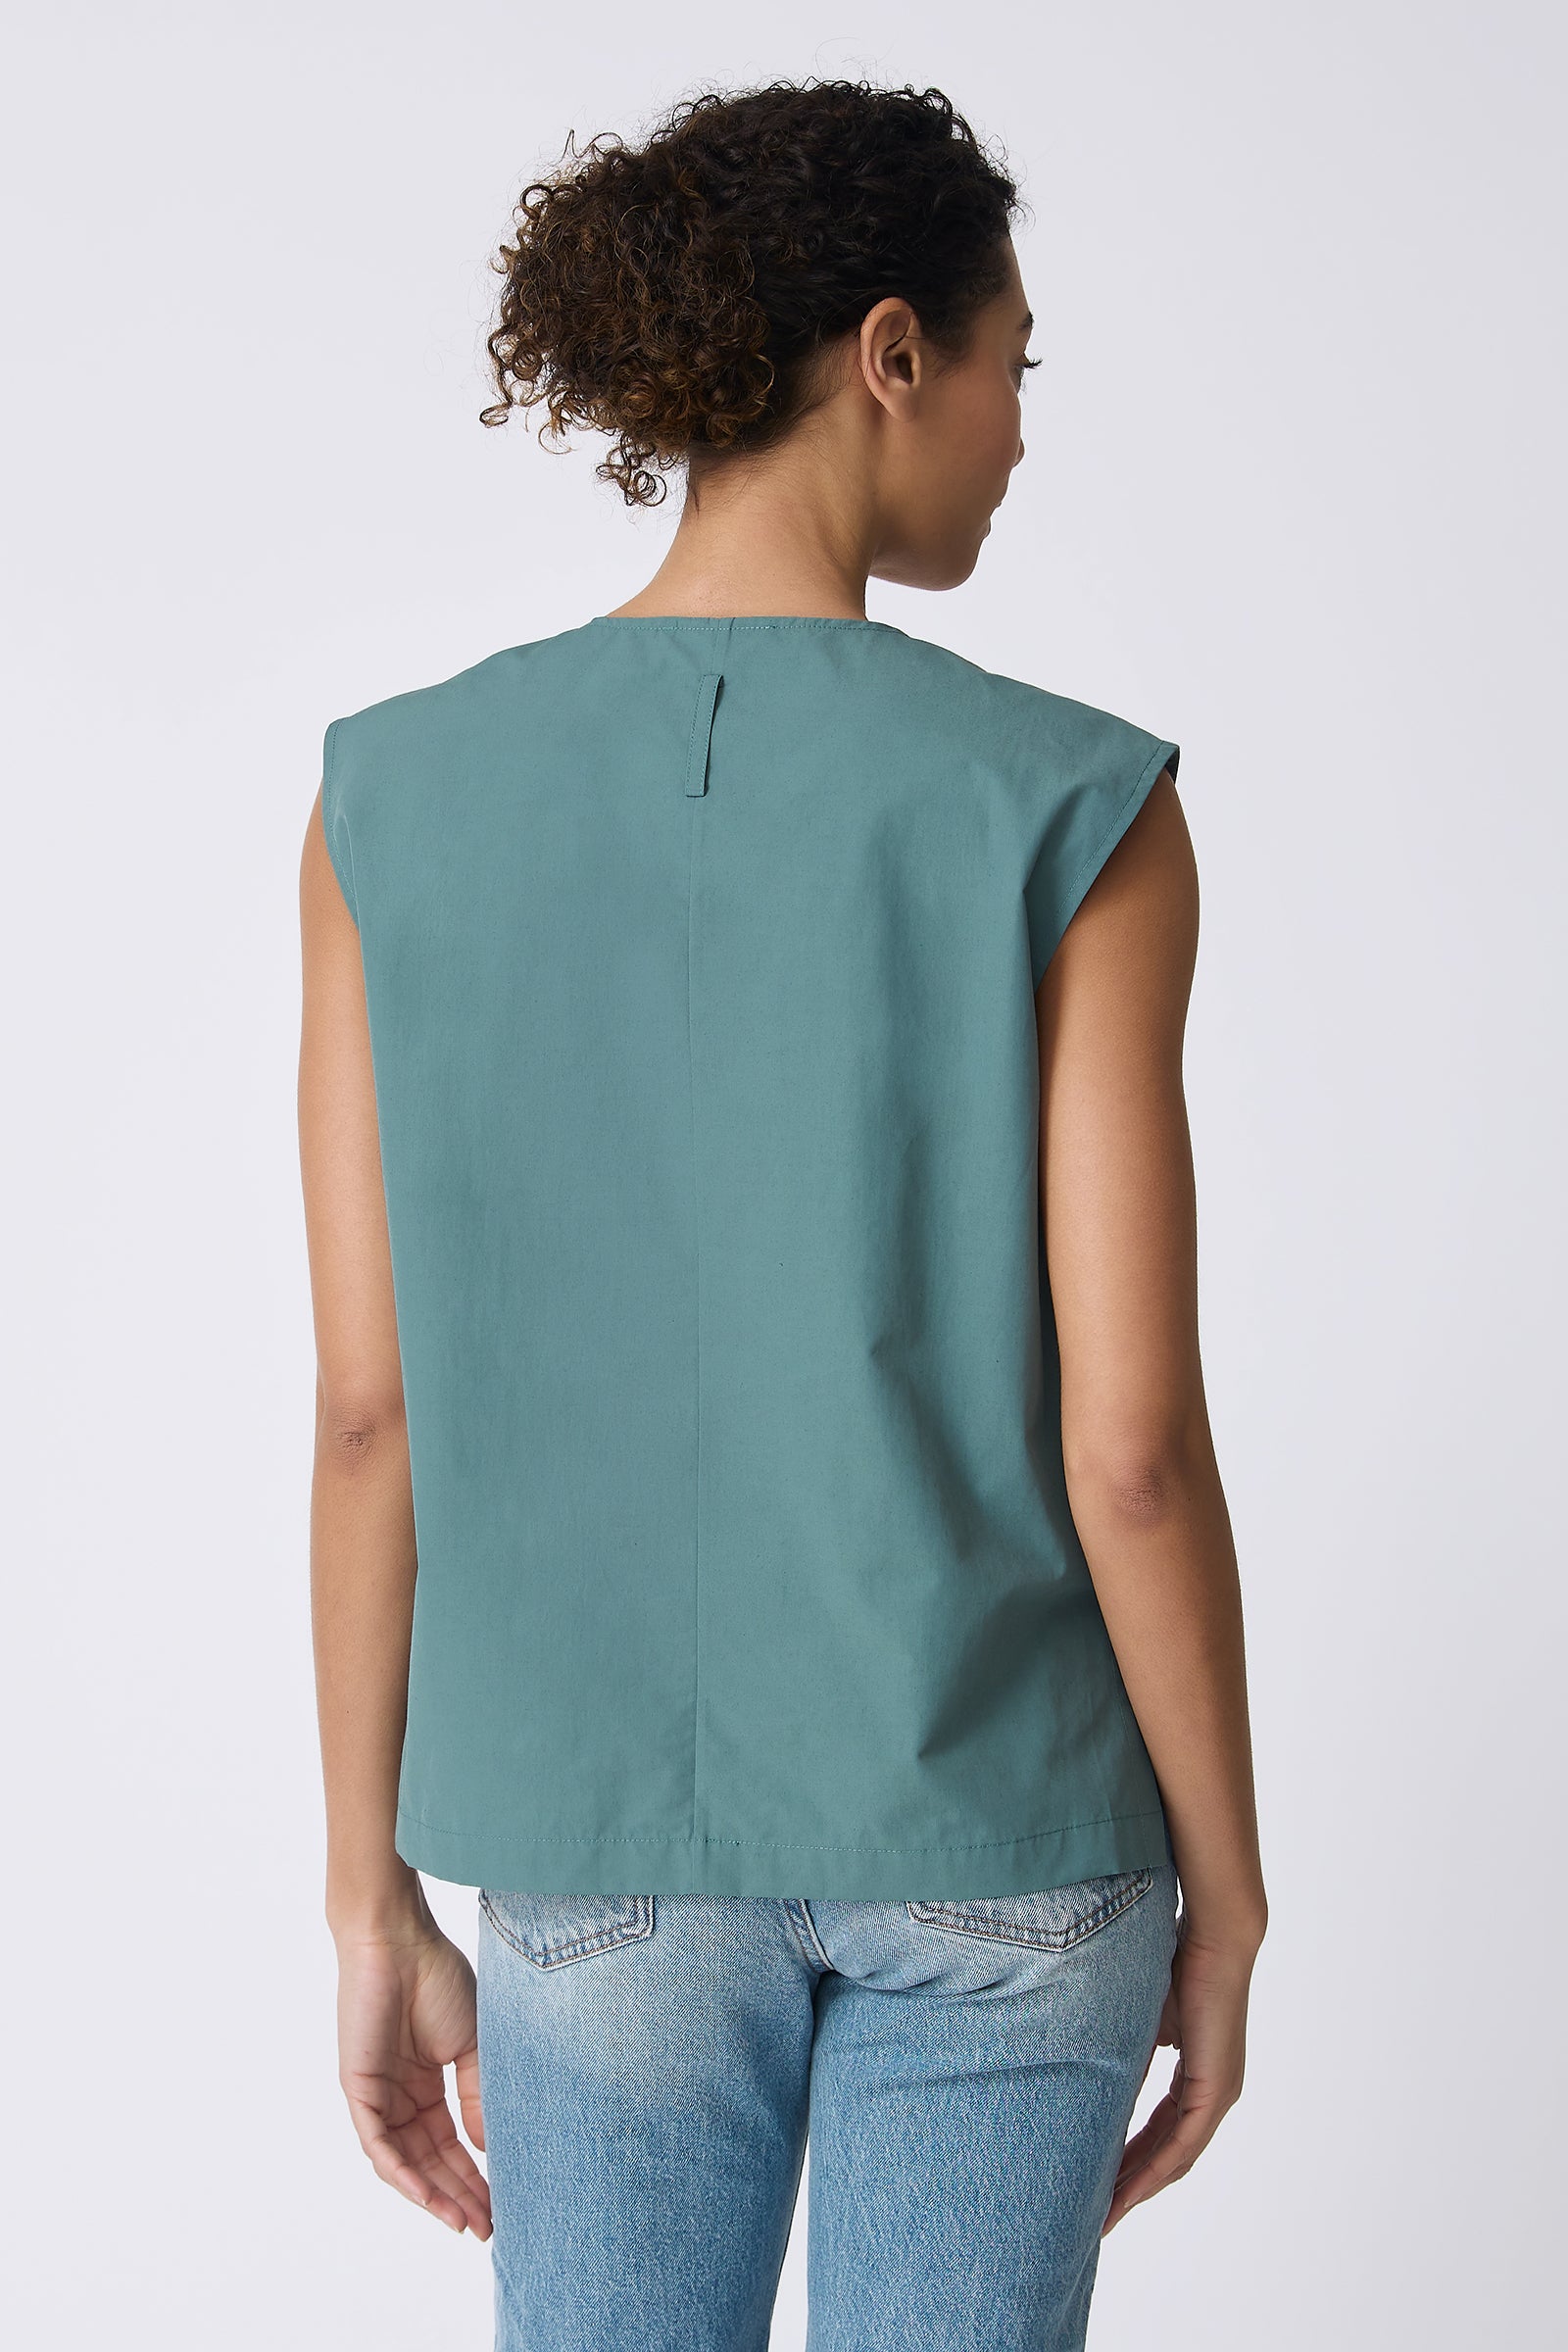 Ava V-Neck Shell Top in Sage on model back view